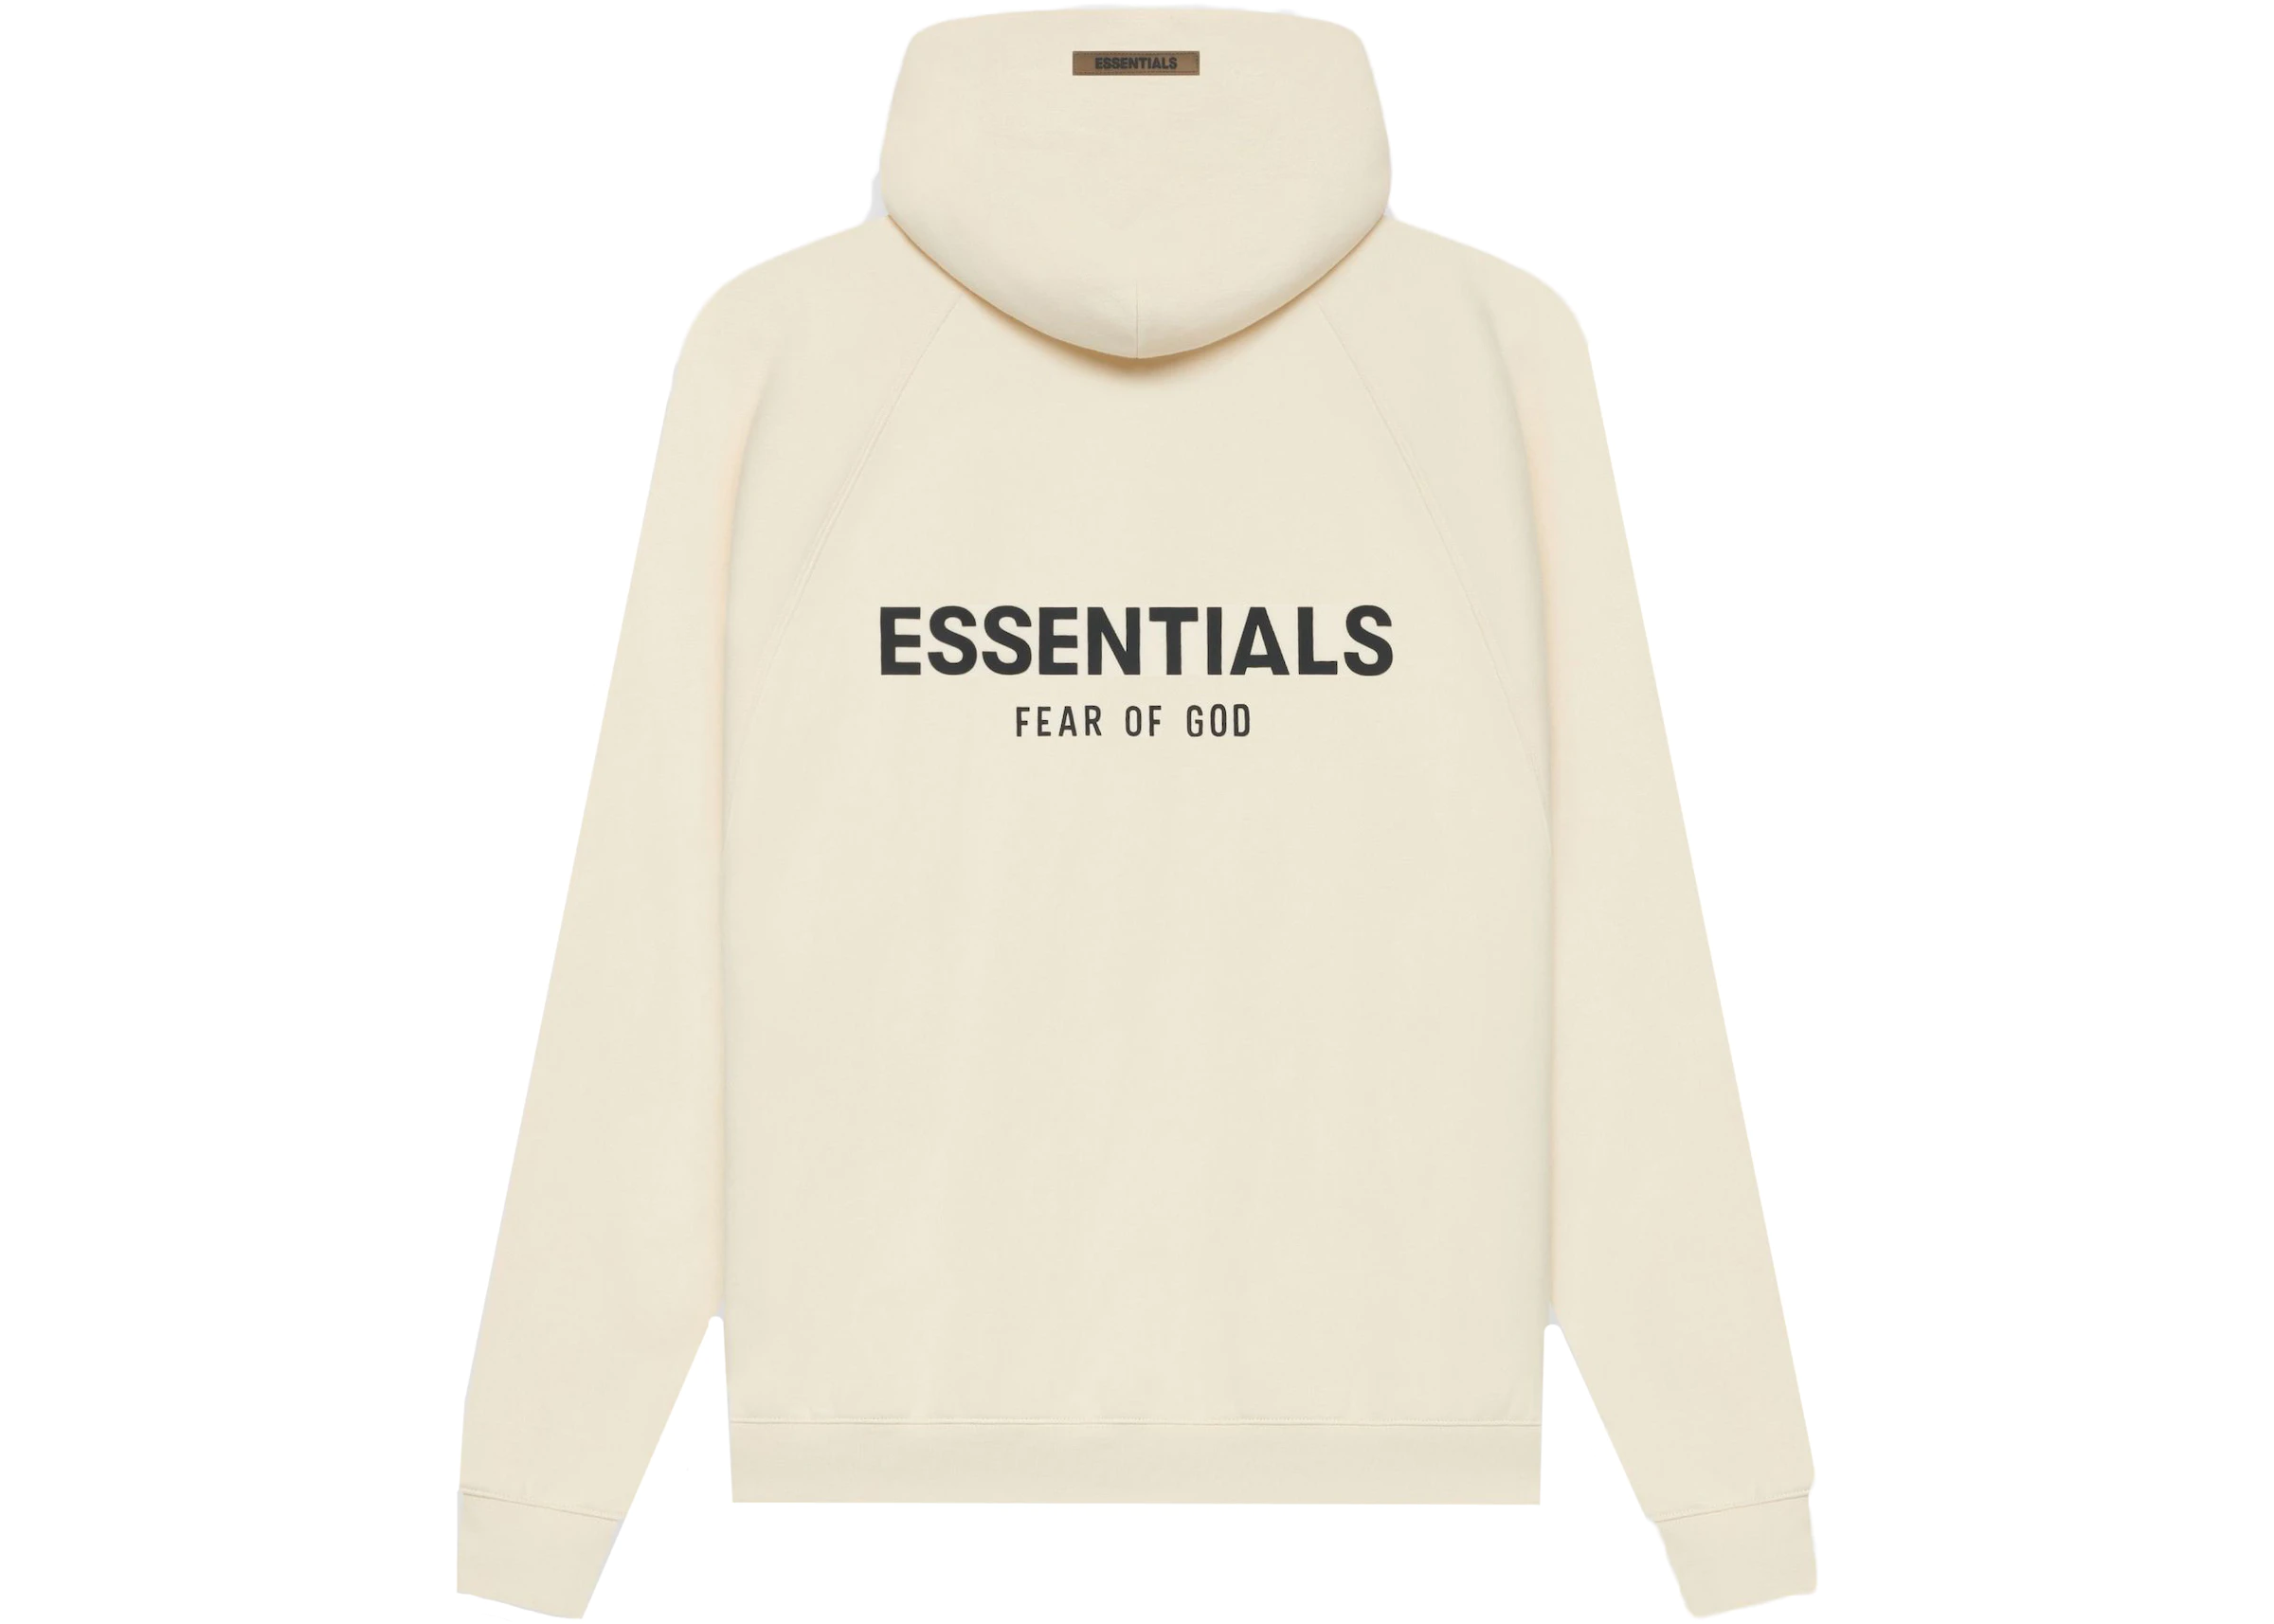 FEAR OF GOD ESSENTIALS Shipping included